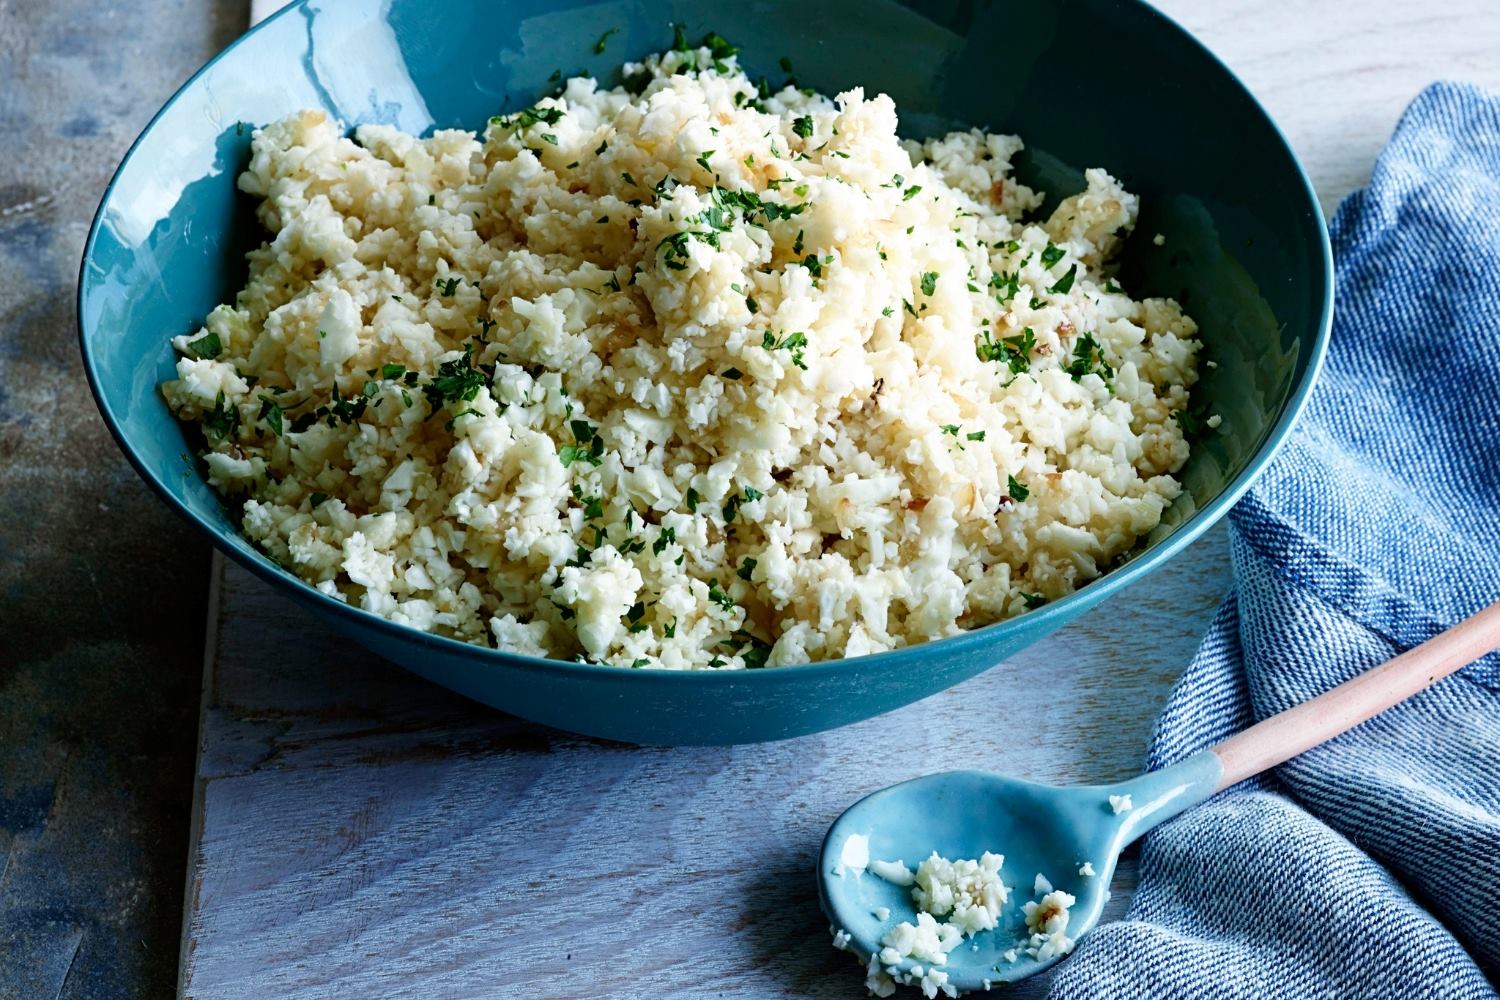 The Surprising Nutritional Benefits Of Cauliflower ‘Rice’ You Need To Know!